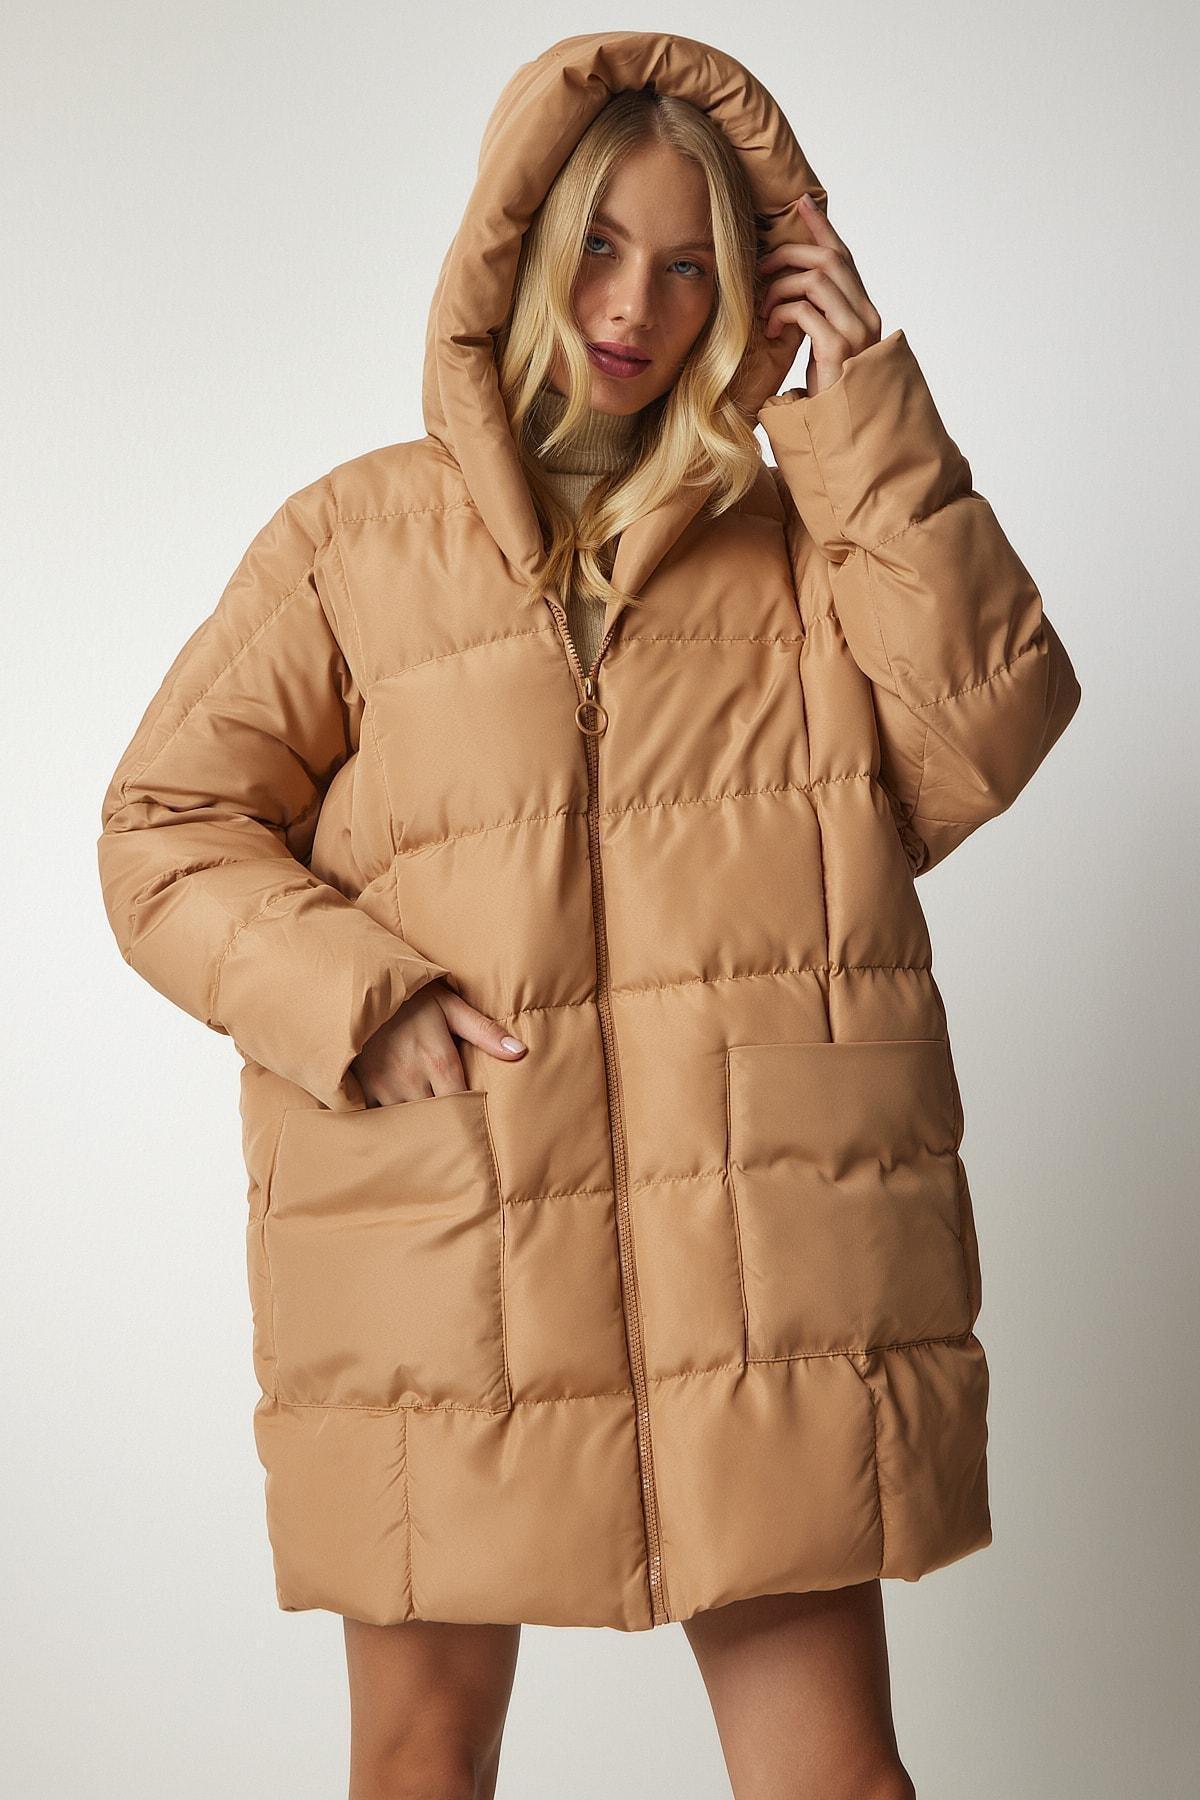 Happiness Istanbul - Beige Hooded Oversized Puffer Coat